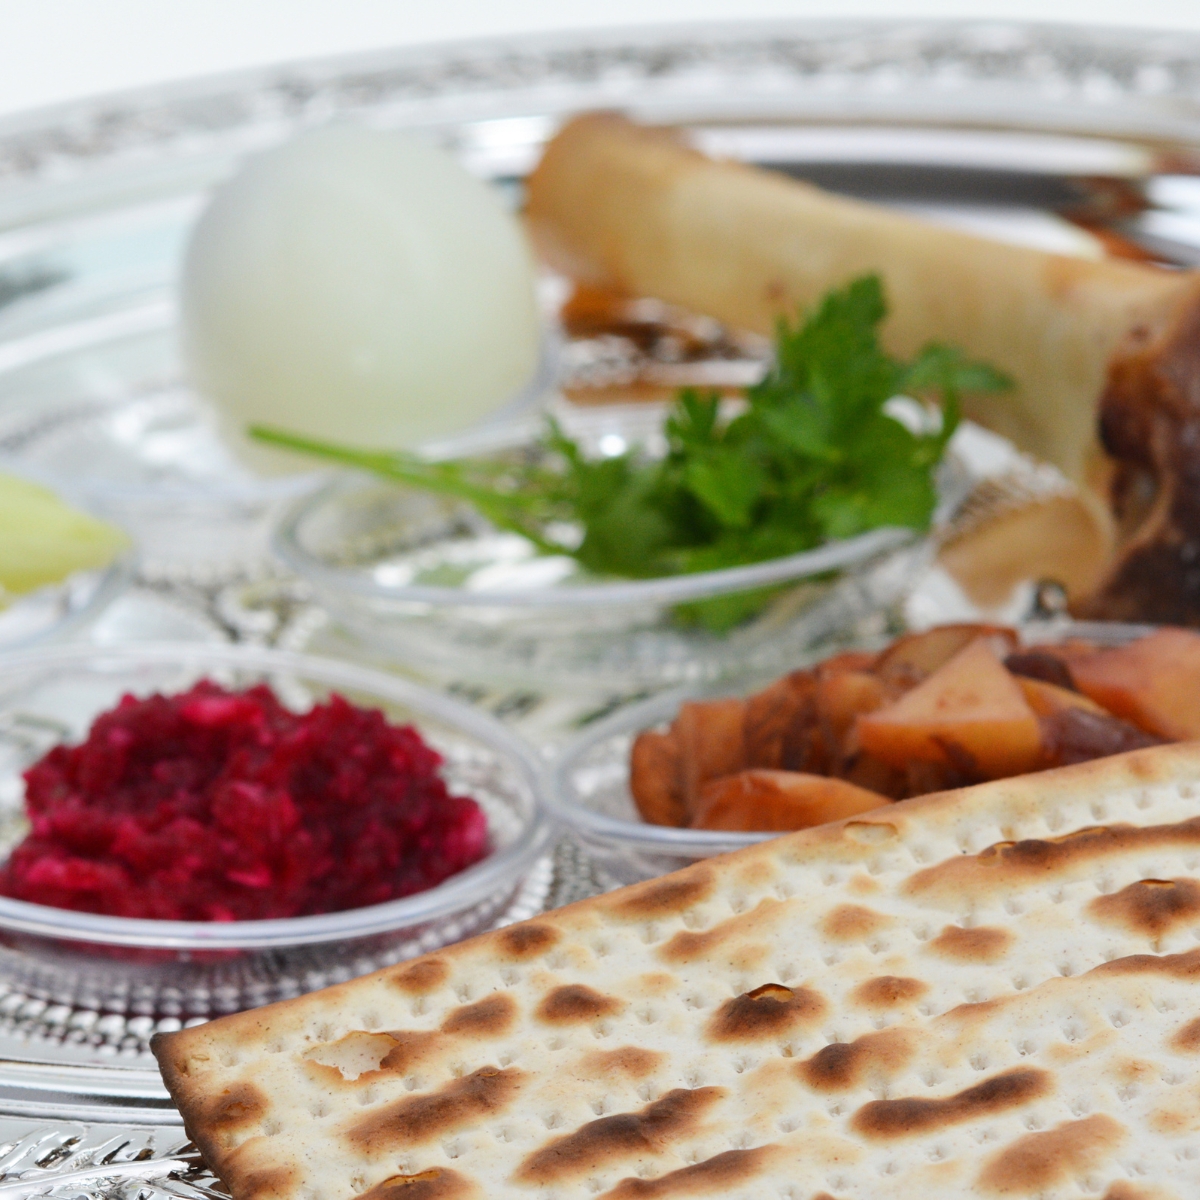 A Passover seder plate